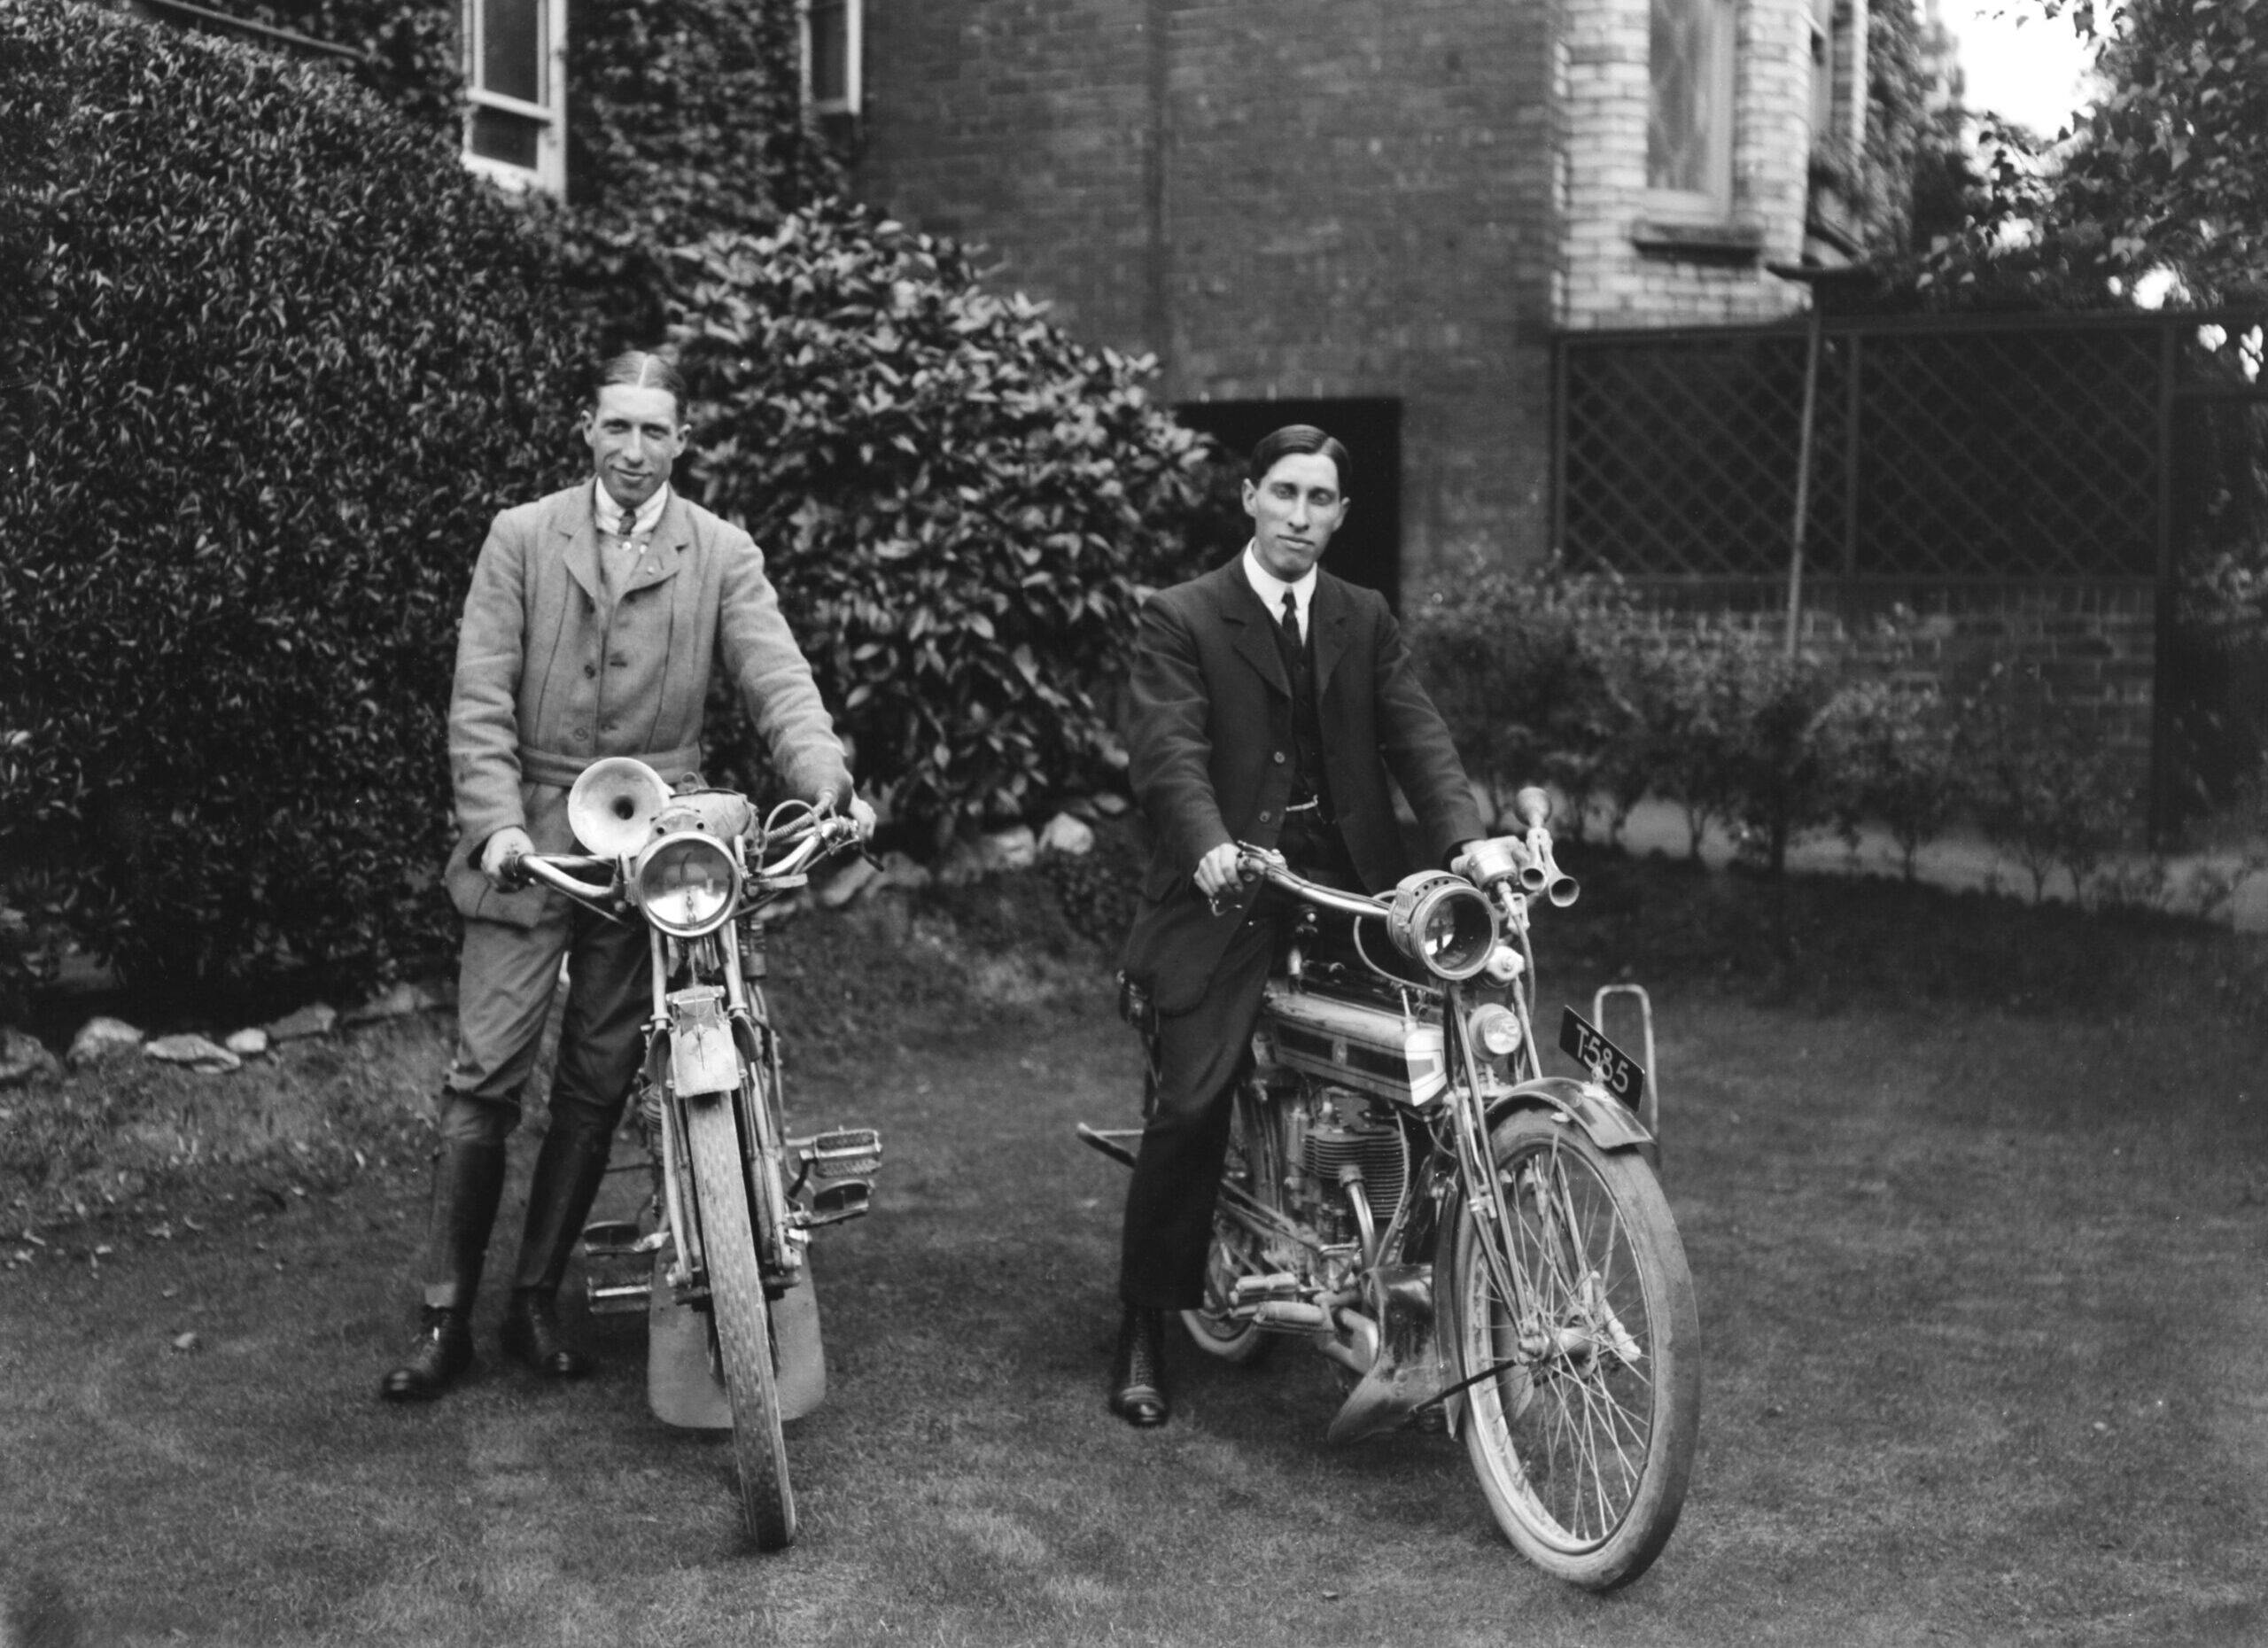 Men With Motorcycles In English Garden